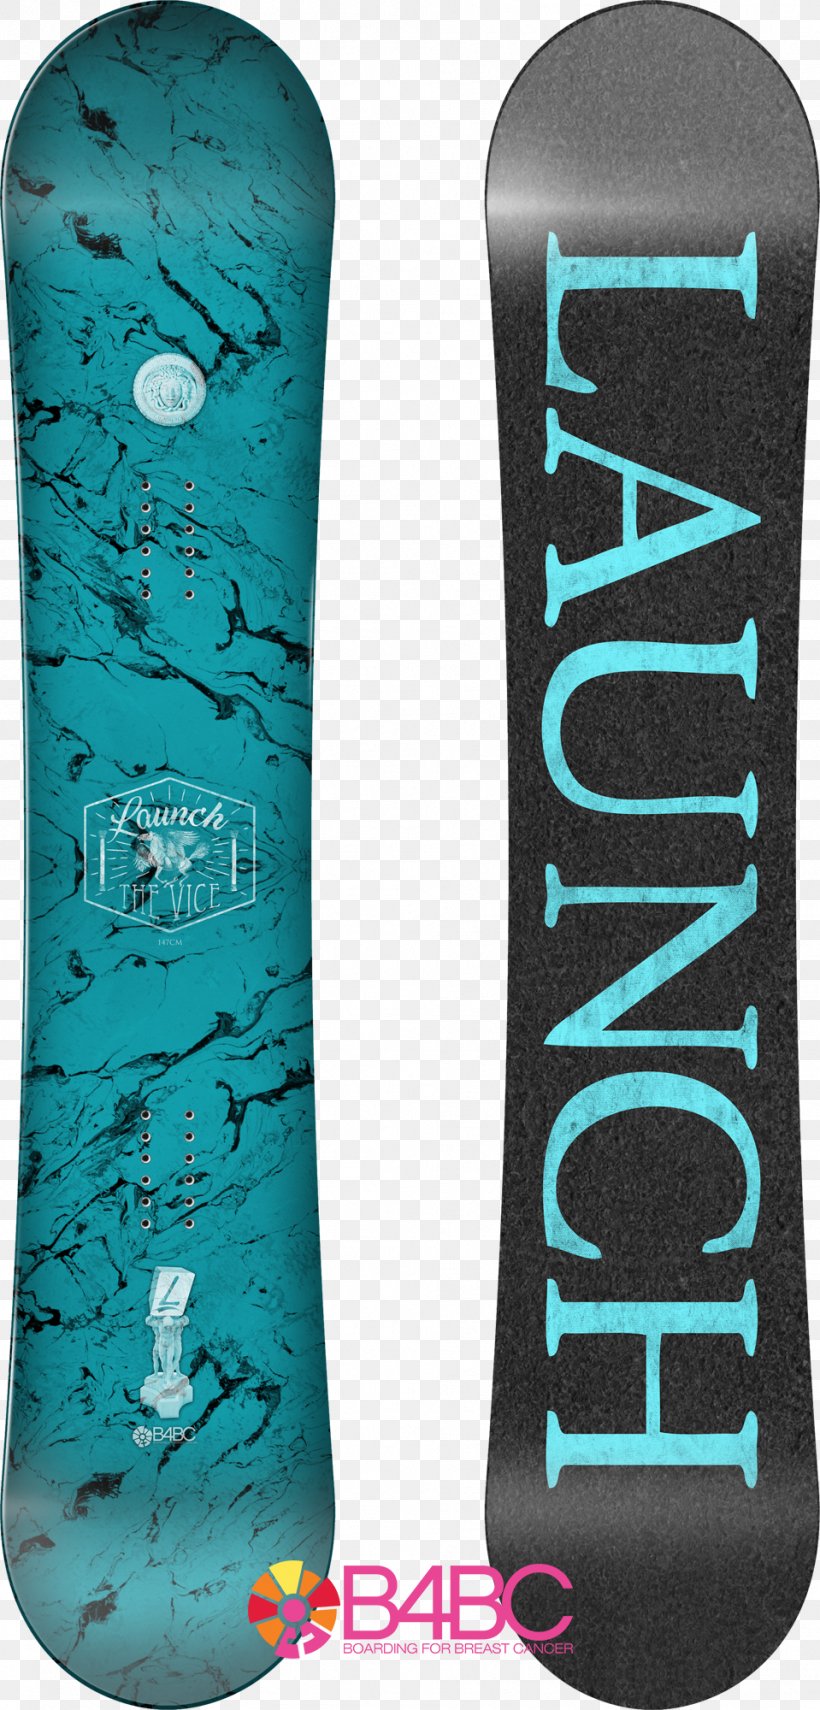 Snowboard Product Design Vice Media Turquoise, PNG, 959x2000px, Snowboard, Electric Blue, Female, Rocket Launch, Sports Equipment Download Free